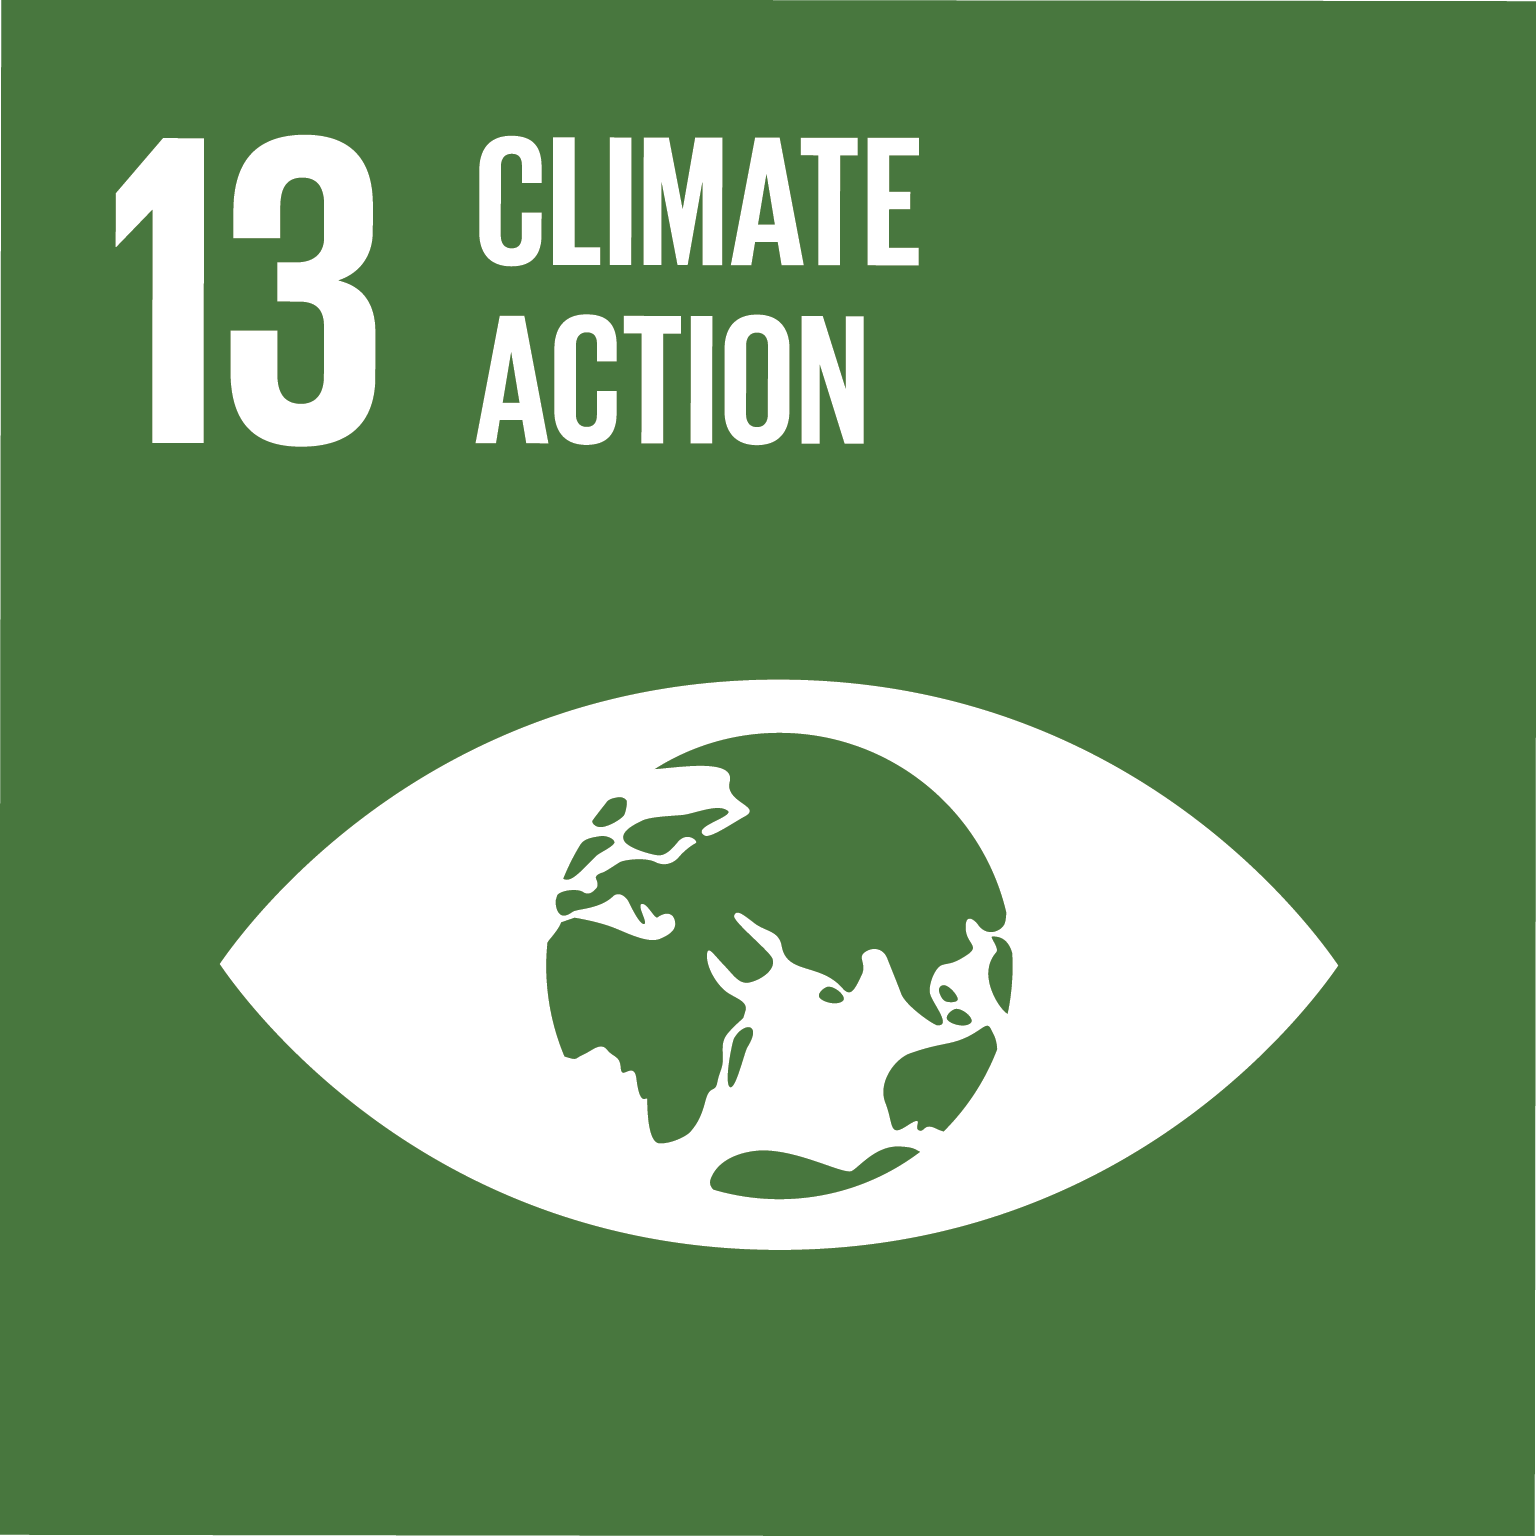 SDG13: Take urgent action to combat climate change and its impacts